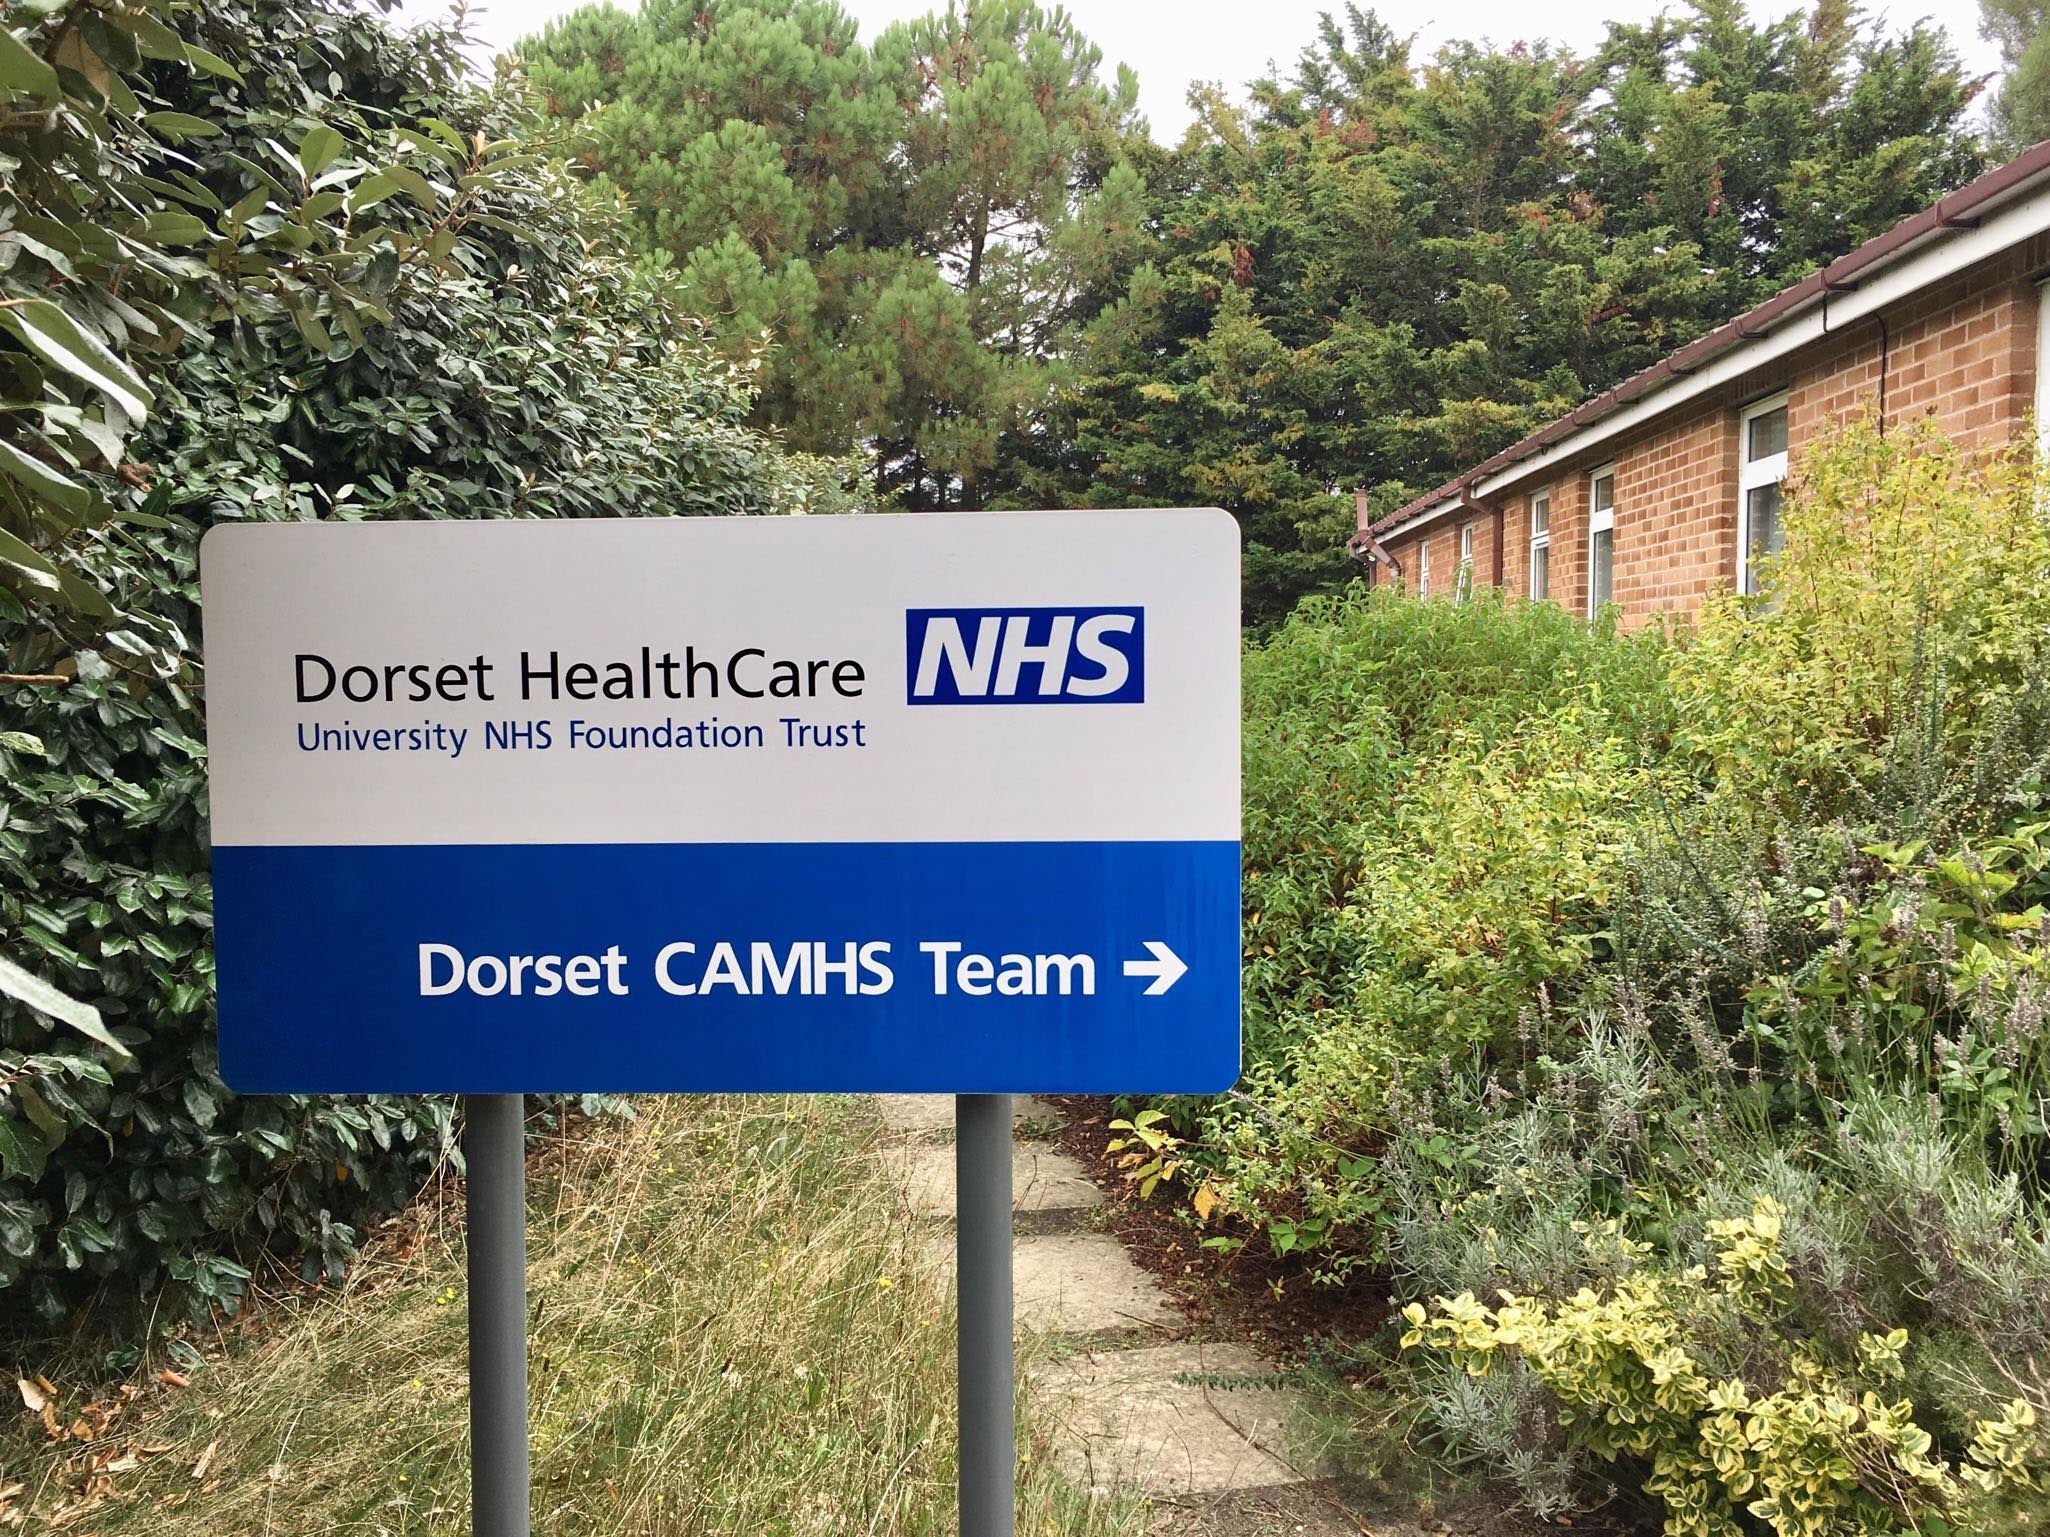 Picture of Dorset CAMHS sign in a leafy setting